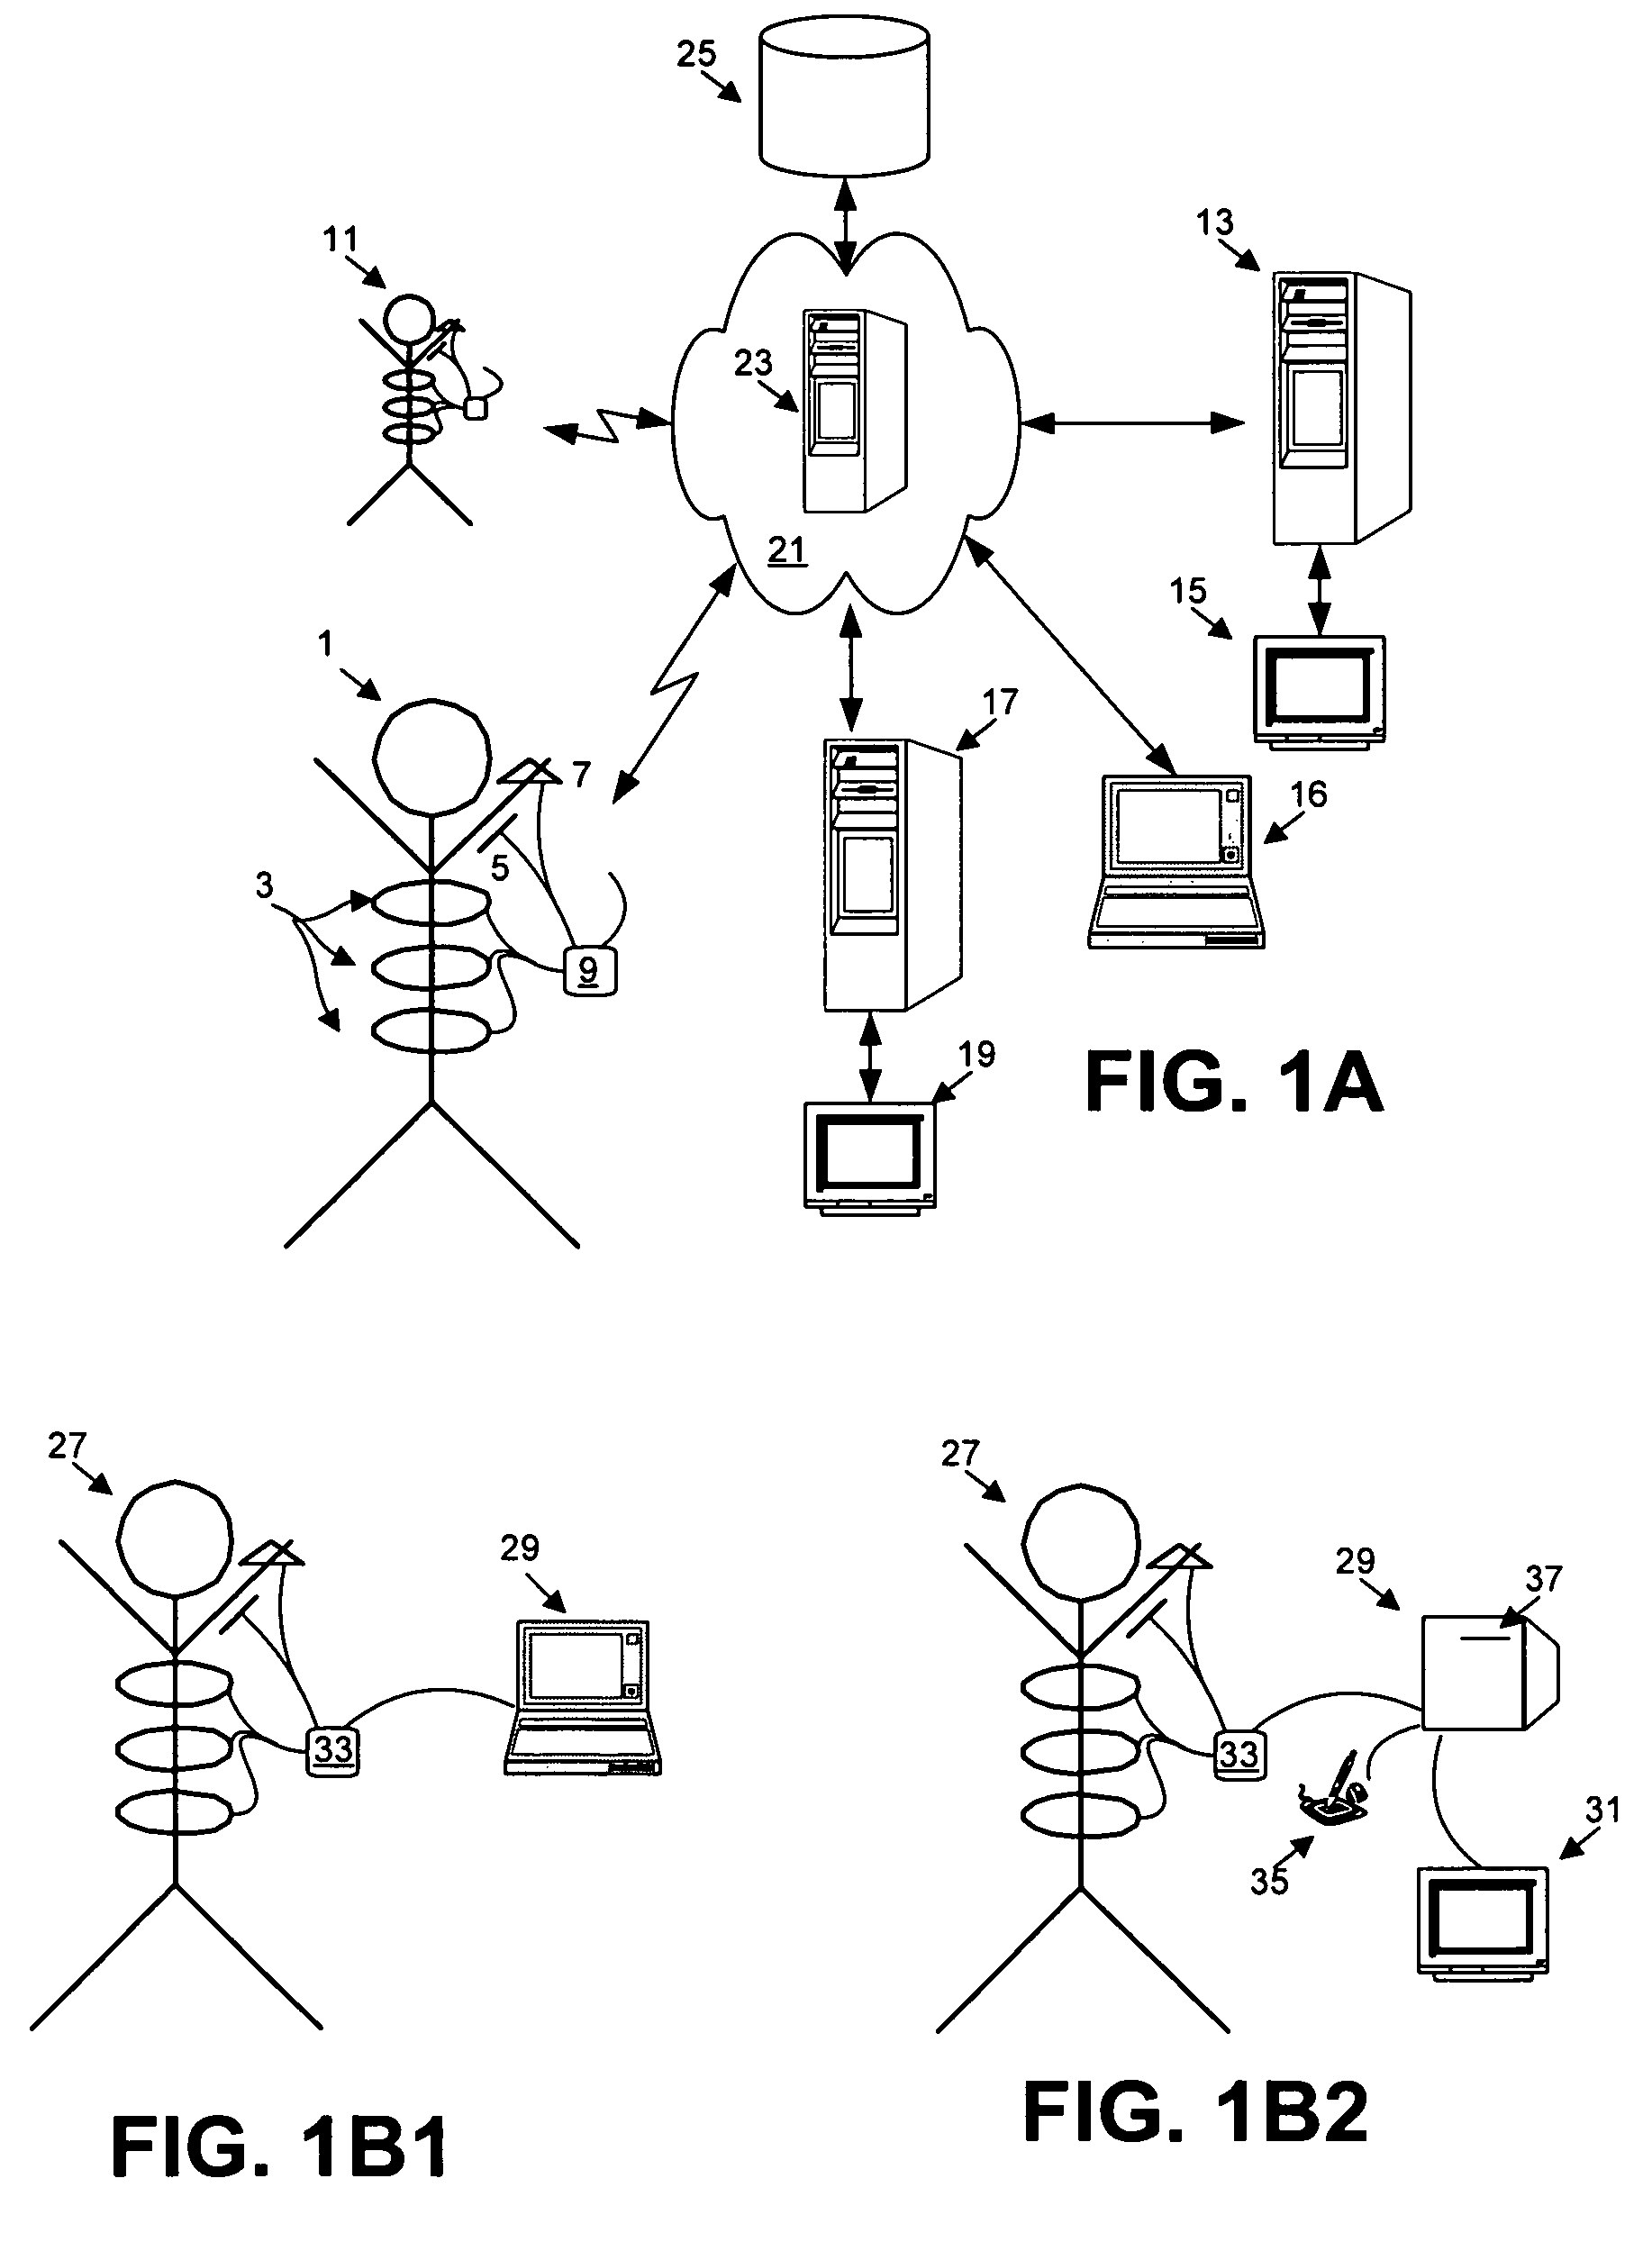 Computer interfaces including physiologically guided avatars